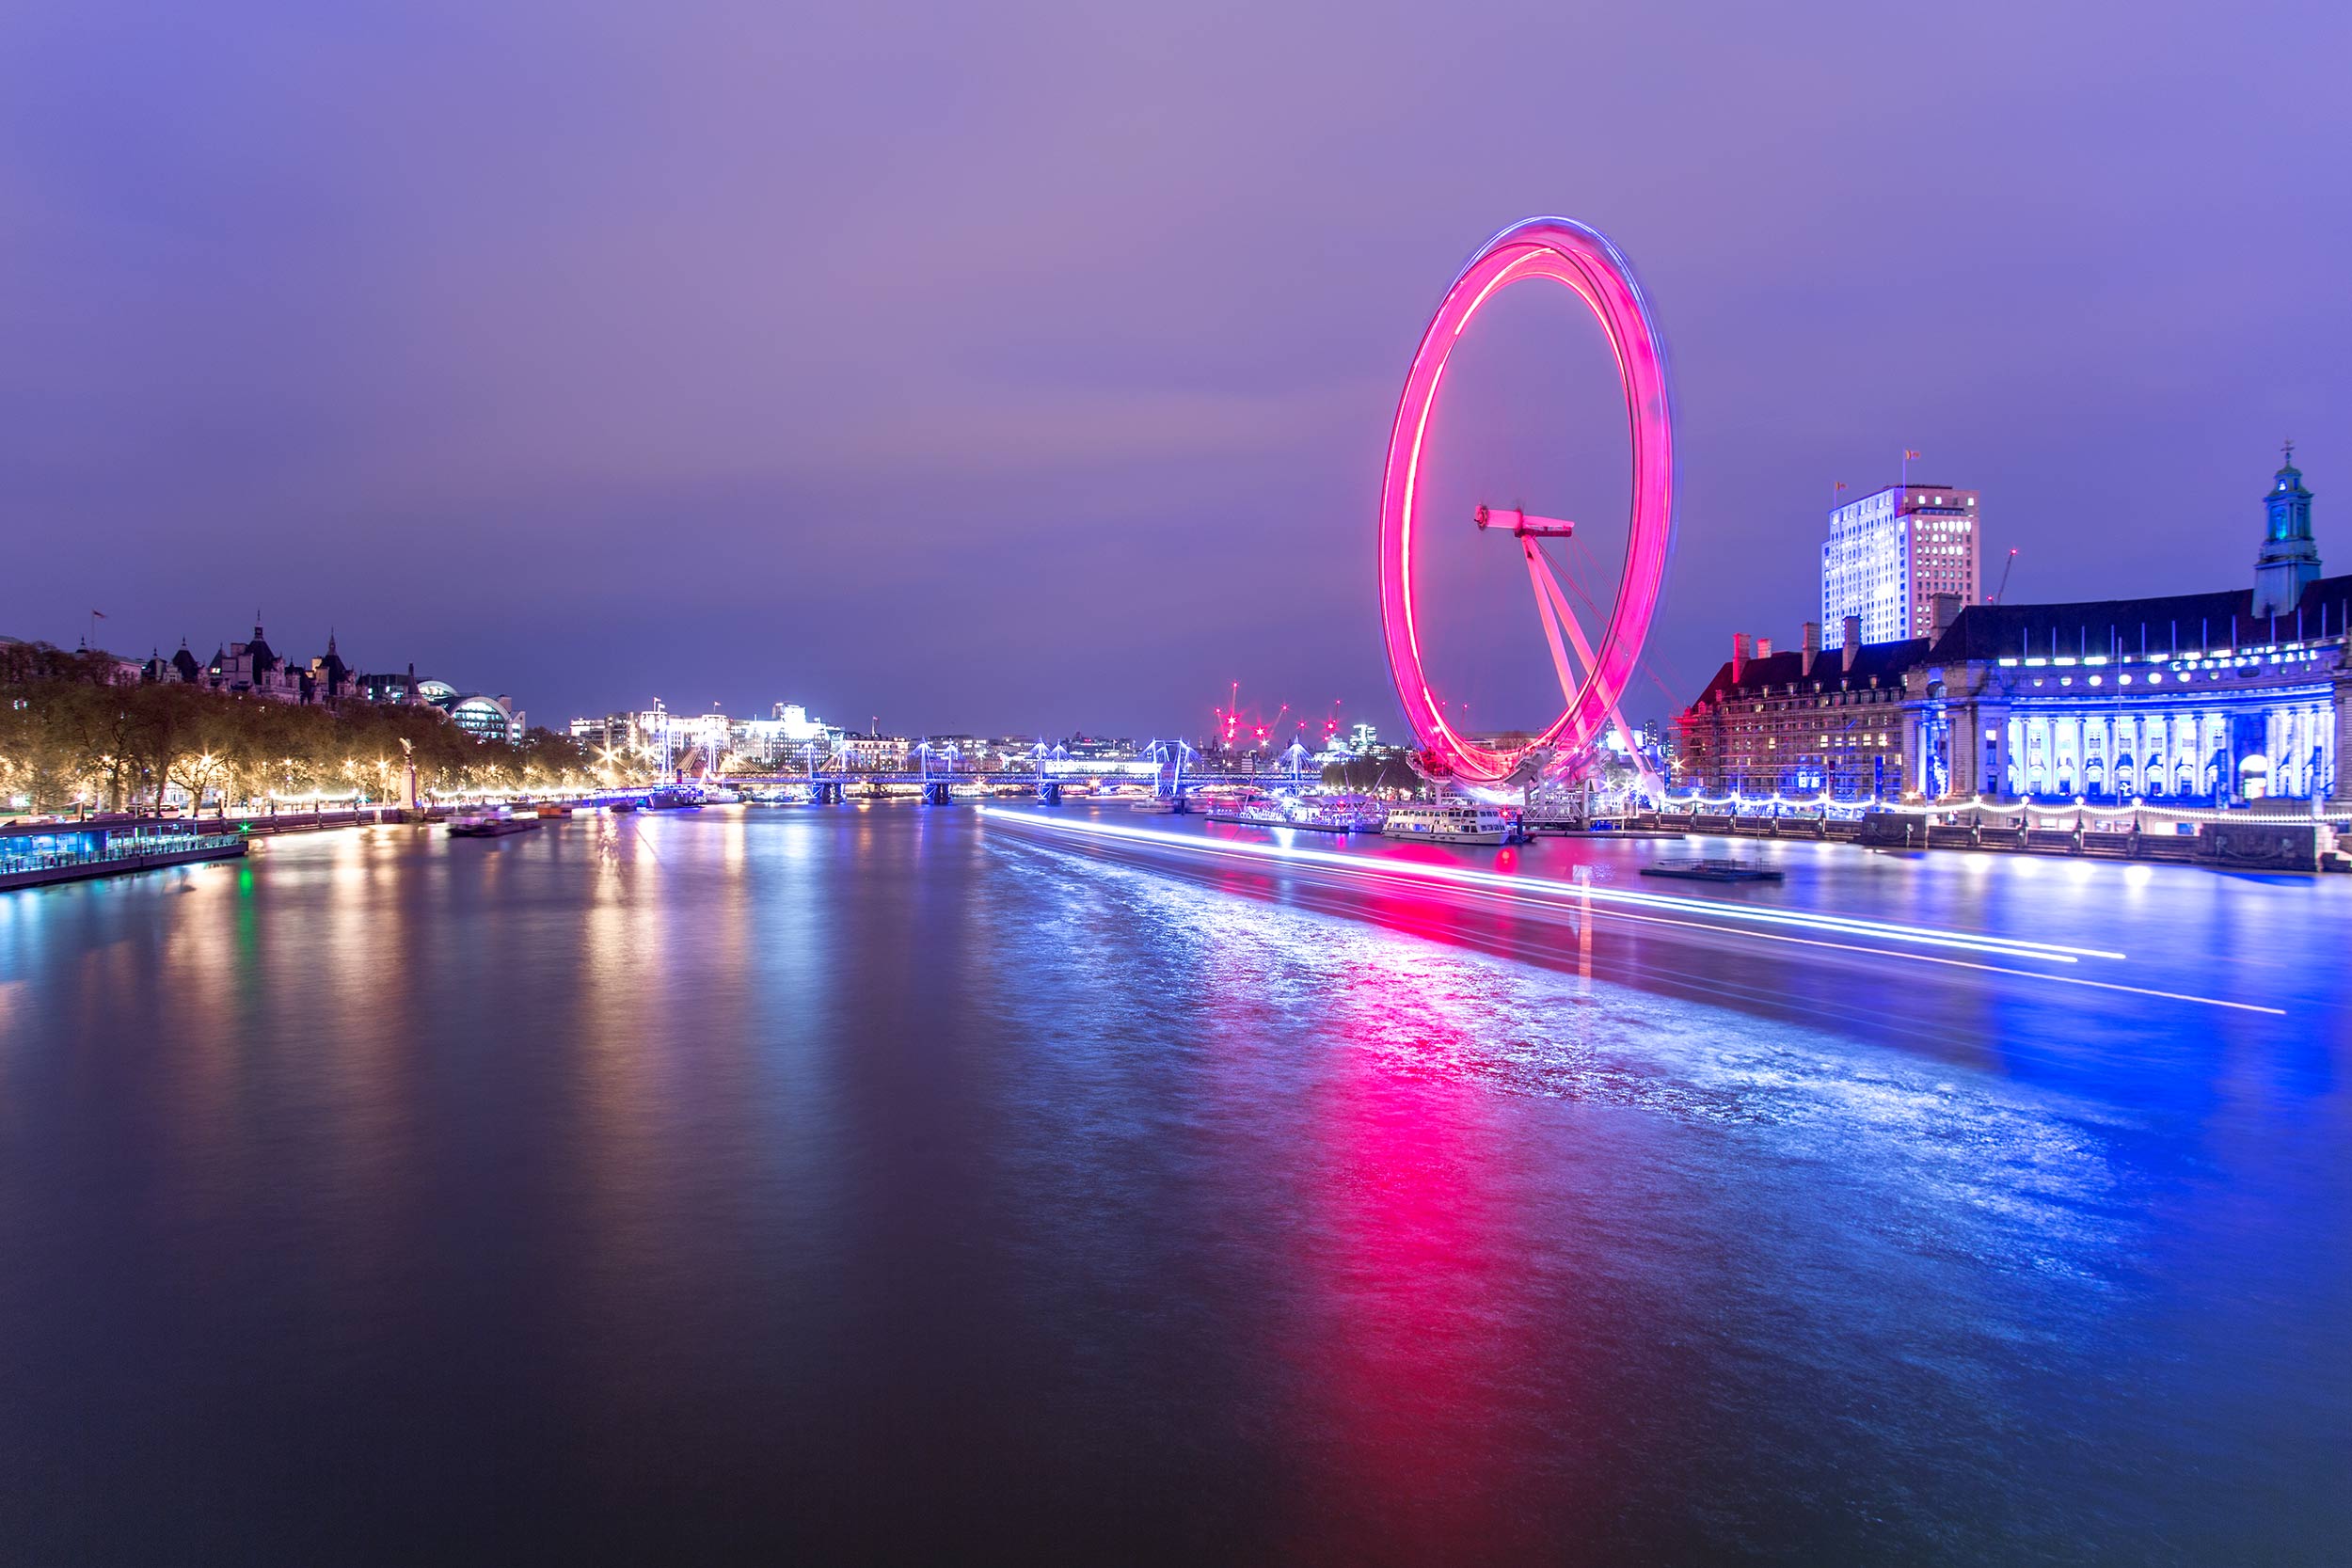 The London Eye reflecting over the River Thames